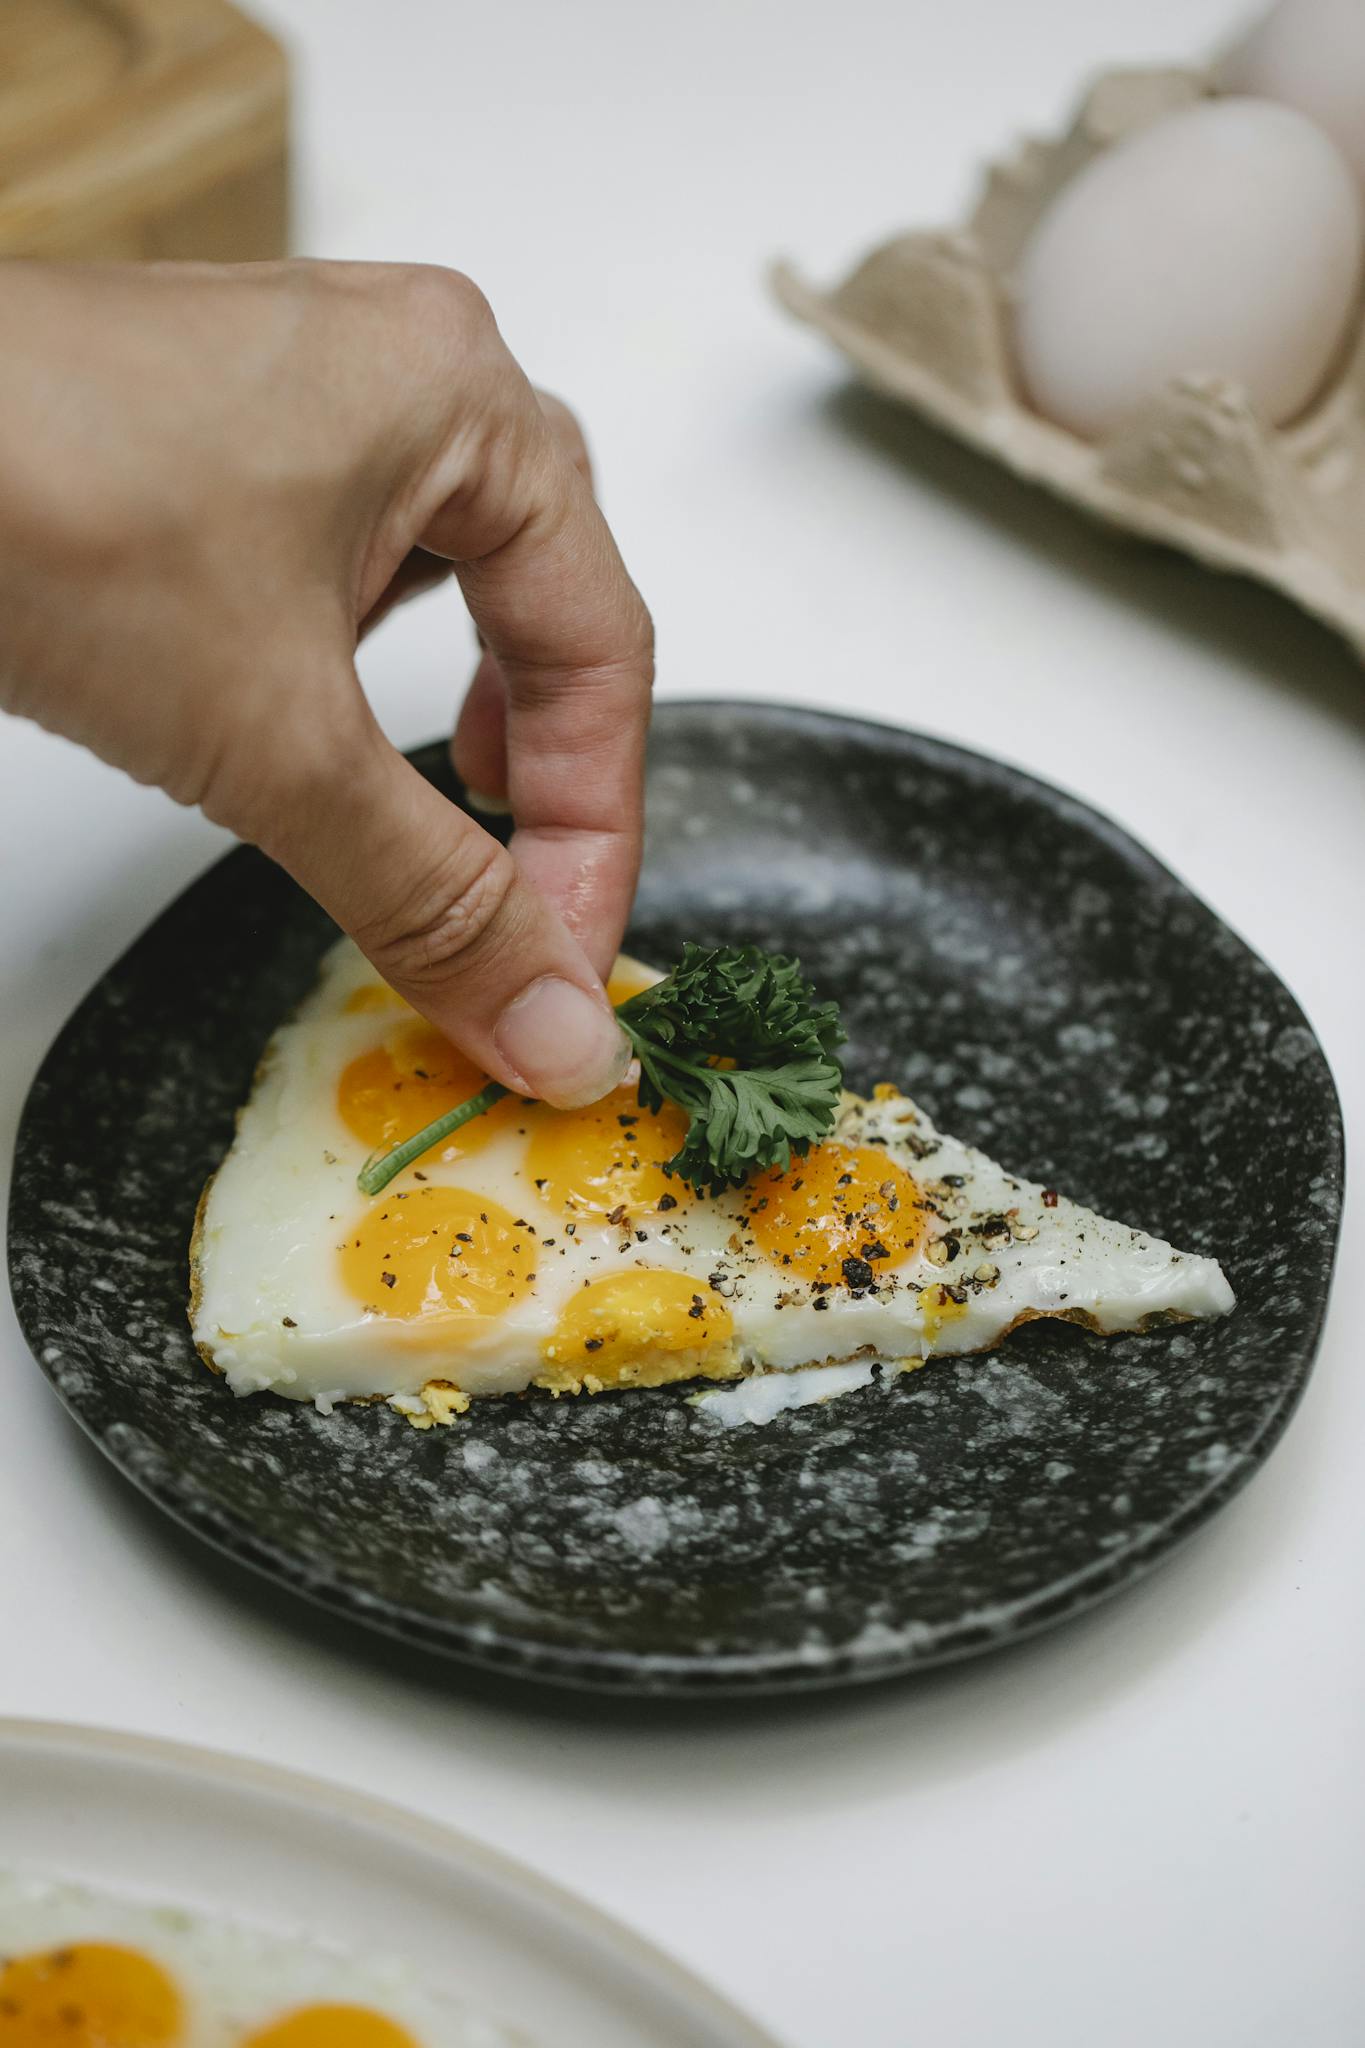 Chef adding sprig of parsley on fried eggs